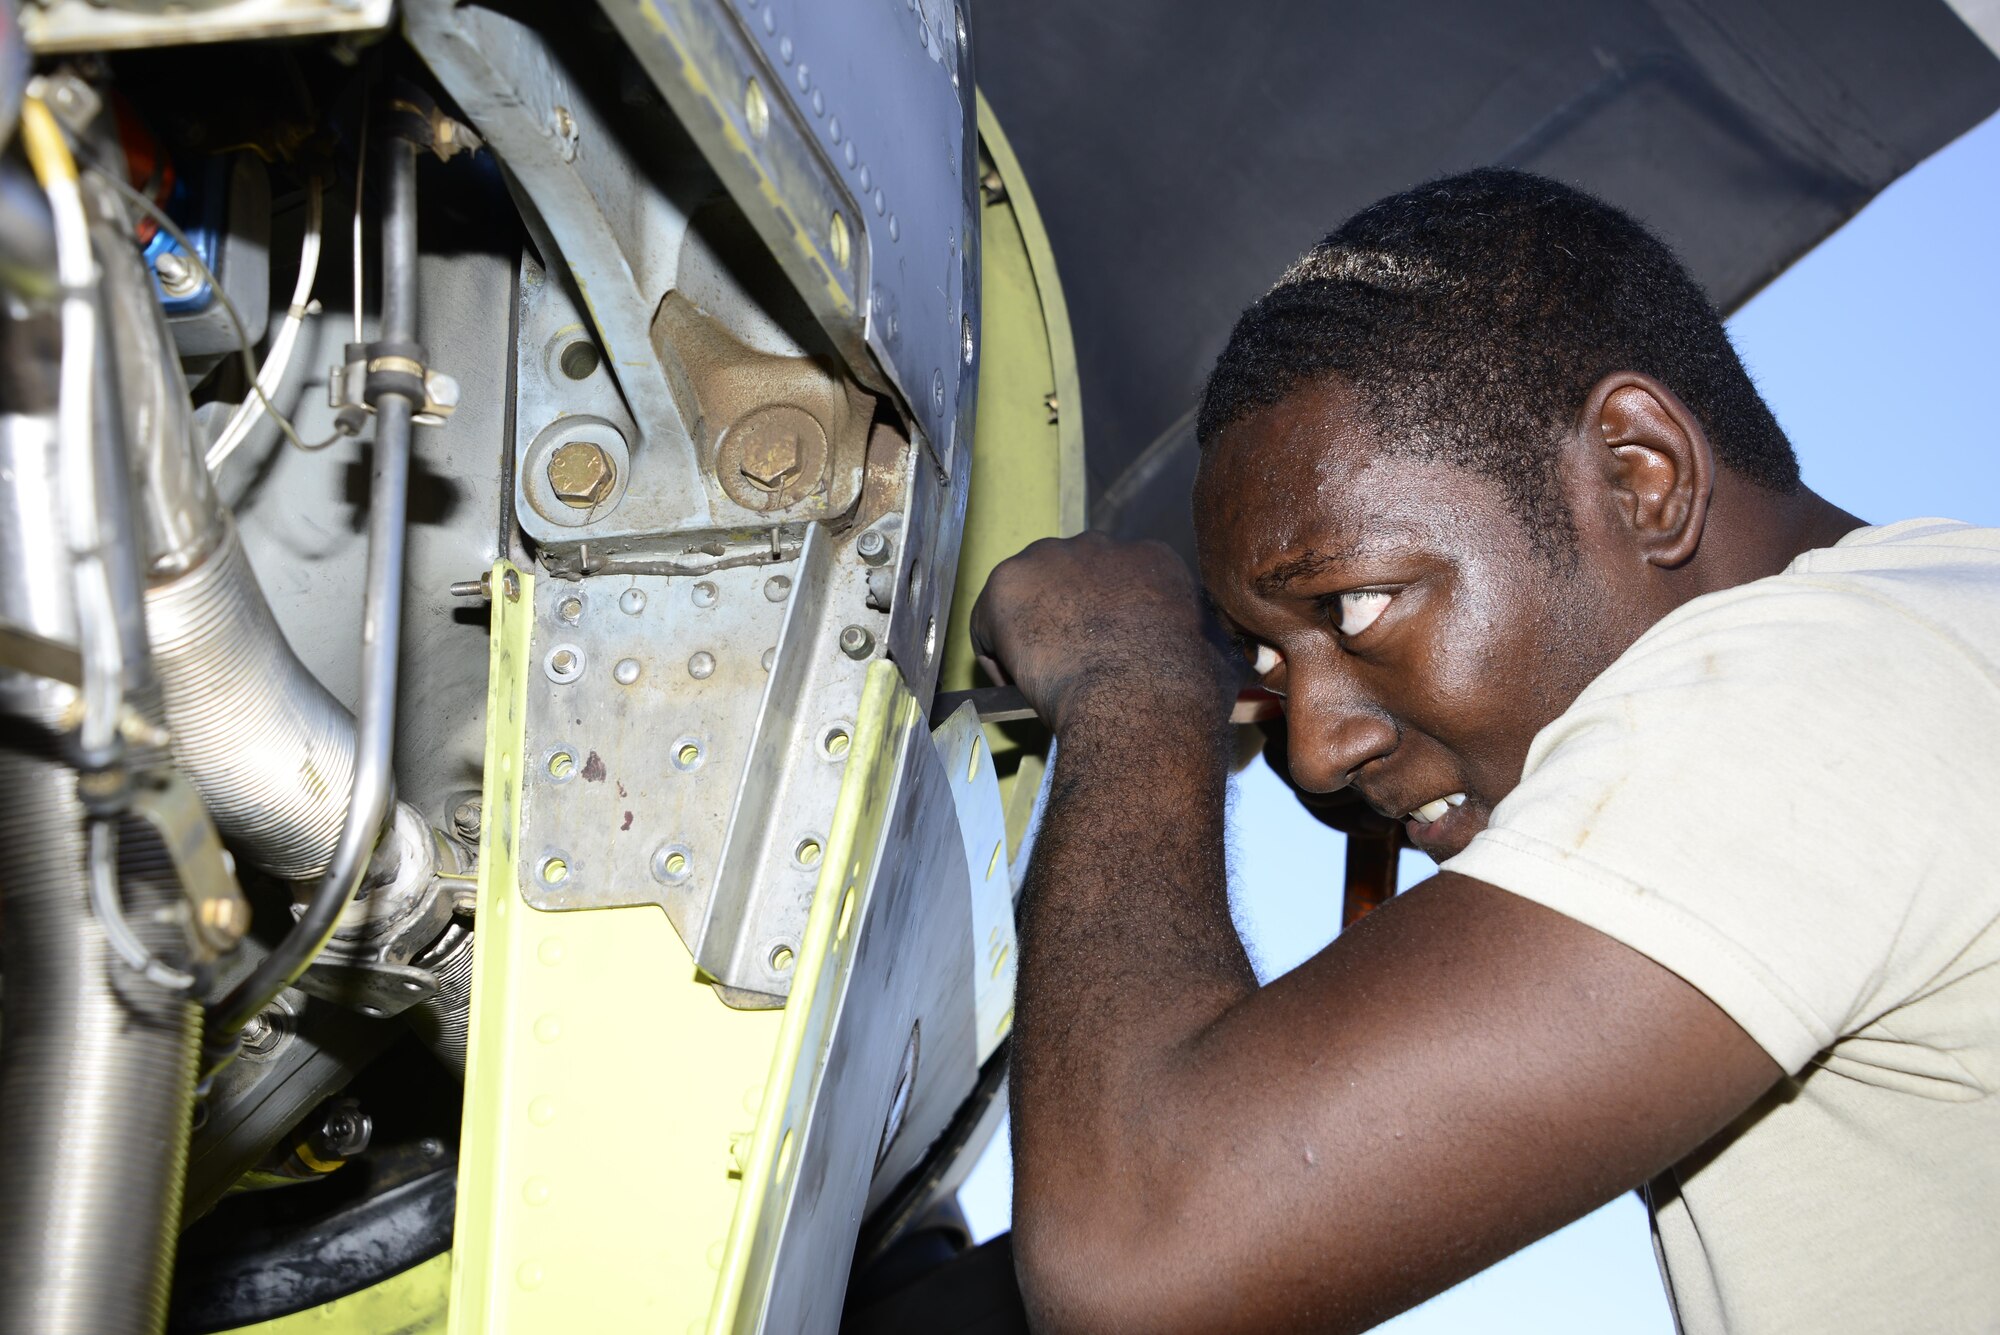 U.S. Air Force Senior Airman George Thompson, 755th Aircraft Maintenance Squadron aerospace propulsion journeyman, adjusts a bolt while installing a new chin scoop on an EC-130H Compass Call at Davis-Monthan Air Force Base, Ariz., Aug. 31, 2016. The 755th AMXS is part of the 55th Electronic Combat Group, a geographically separated unit out of Offutt AFB, Neb. (U.S. Air Force photo by Senior Airman Betty R. Chevalier)